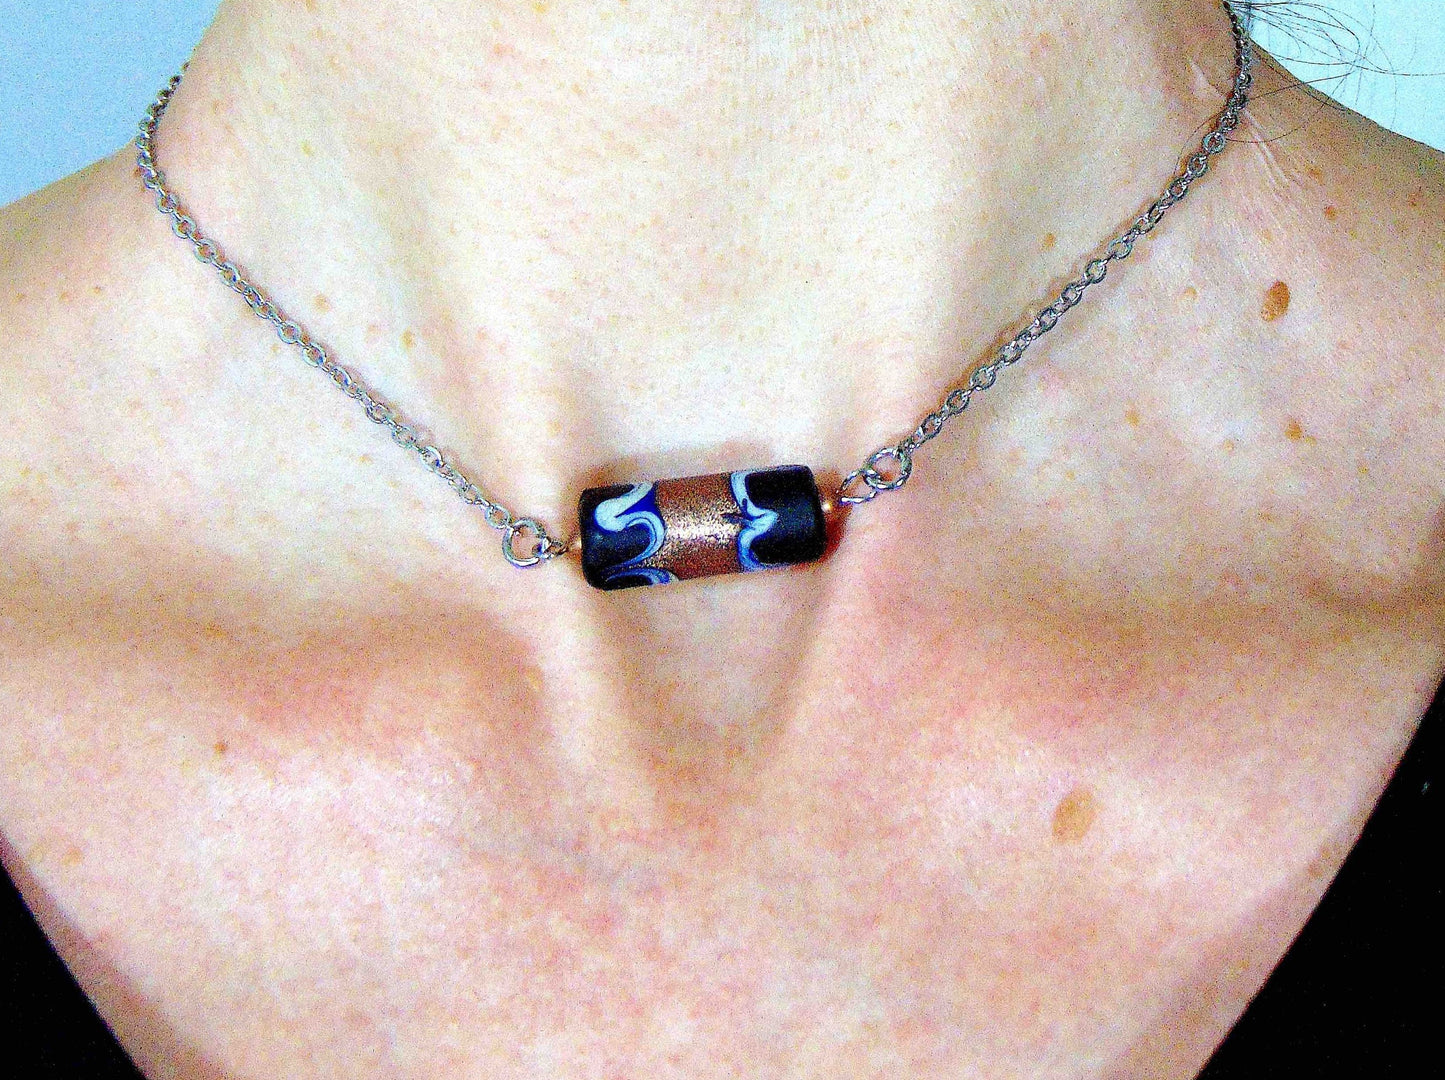 14-inch necklace with matte black Murano glass cylinder, feather pattern and metallic bronze center, stainless steel chain